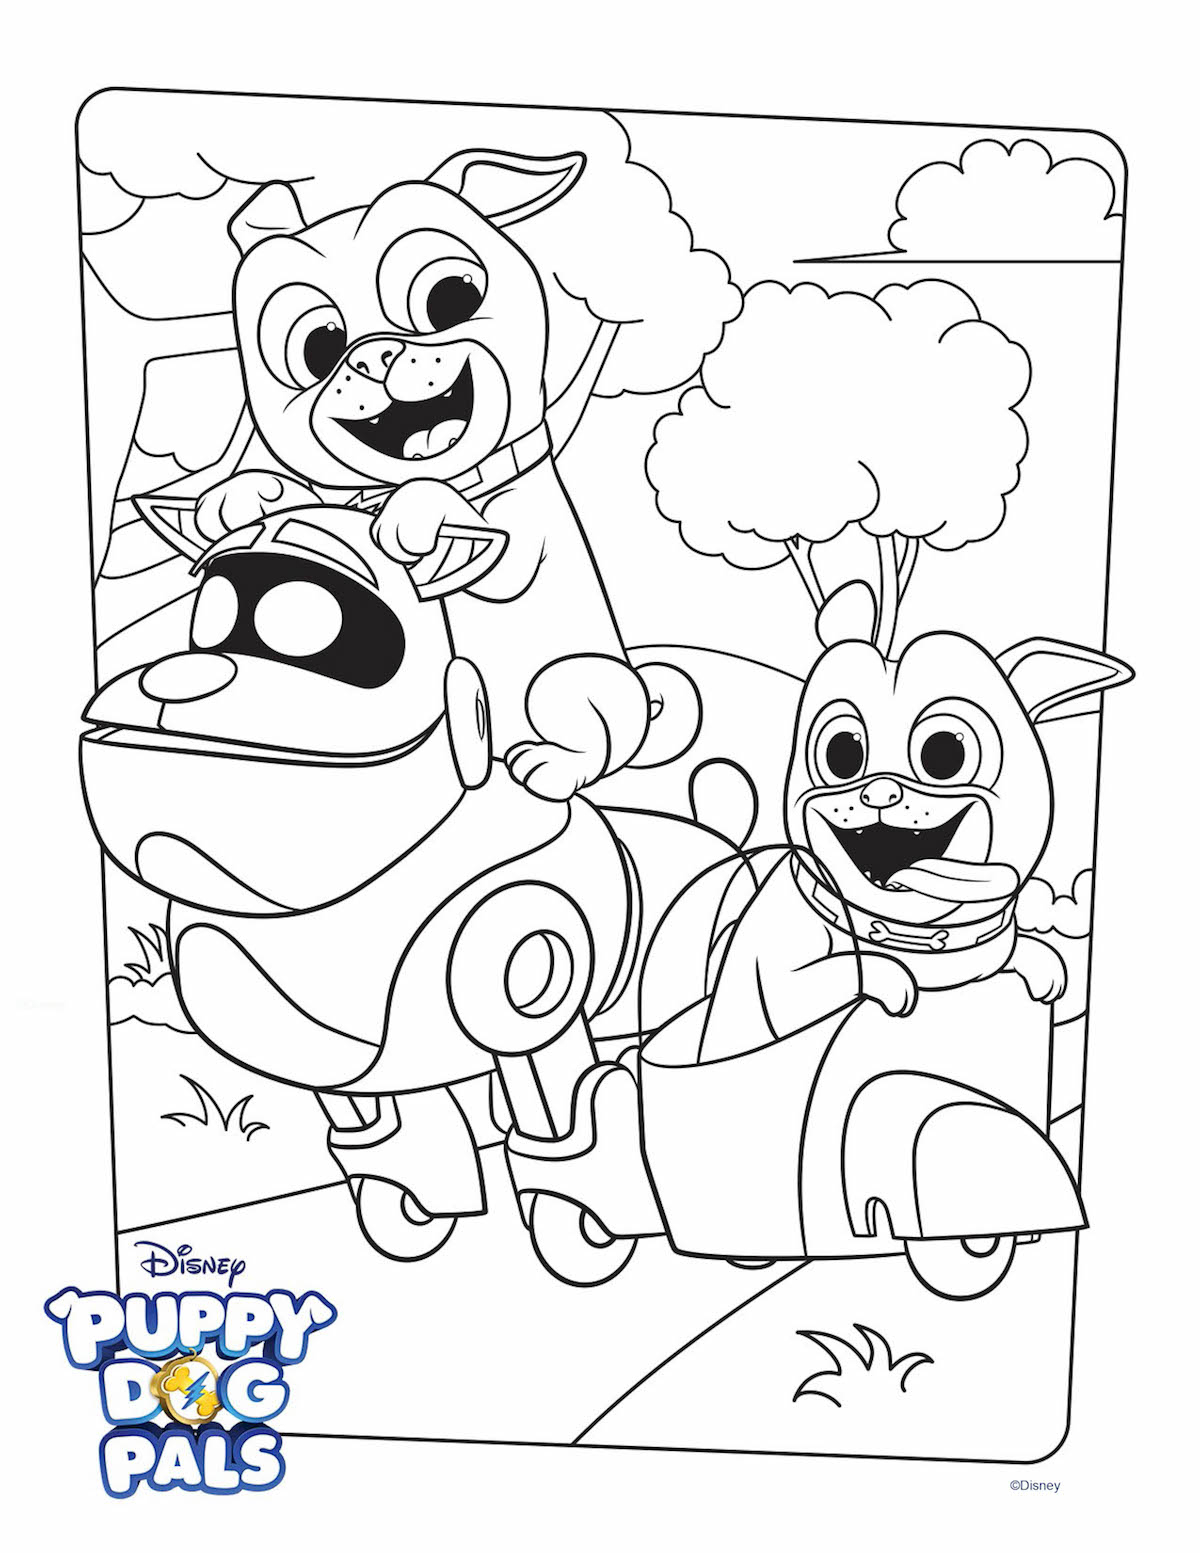 Disney.com Coloring Pages Puppy Dog Pals Coloring Page Activity Disney Family